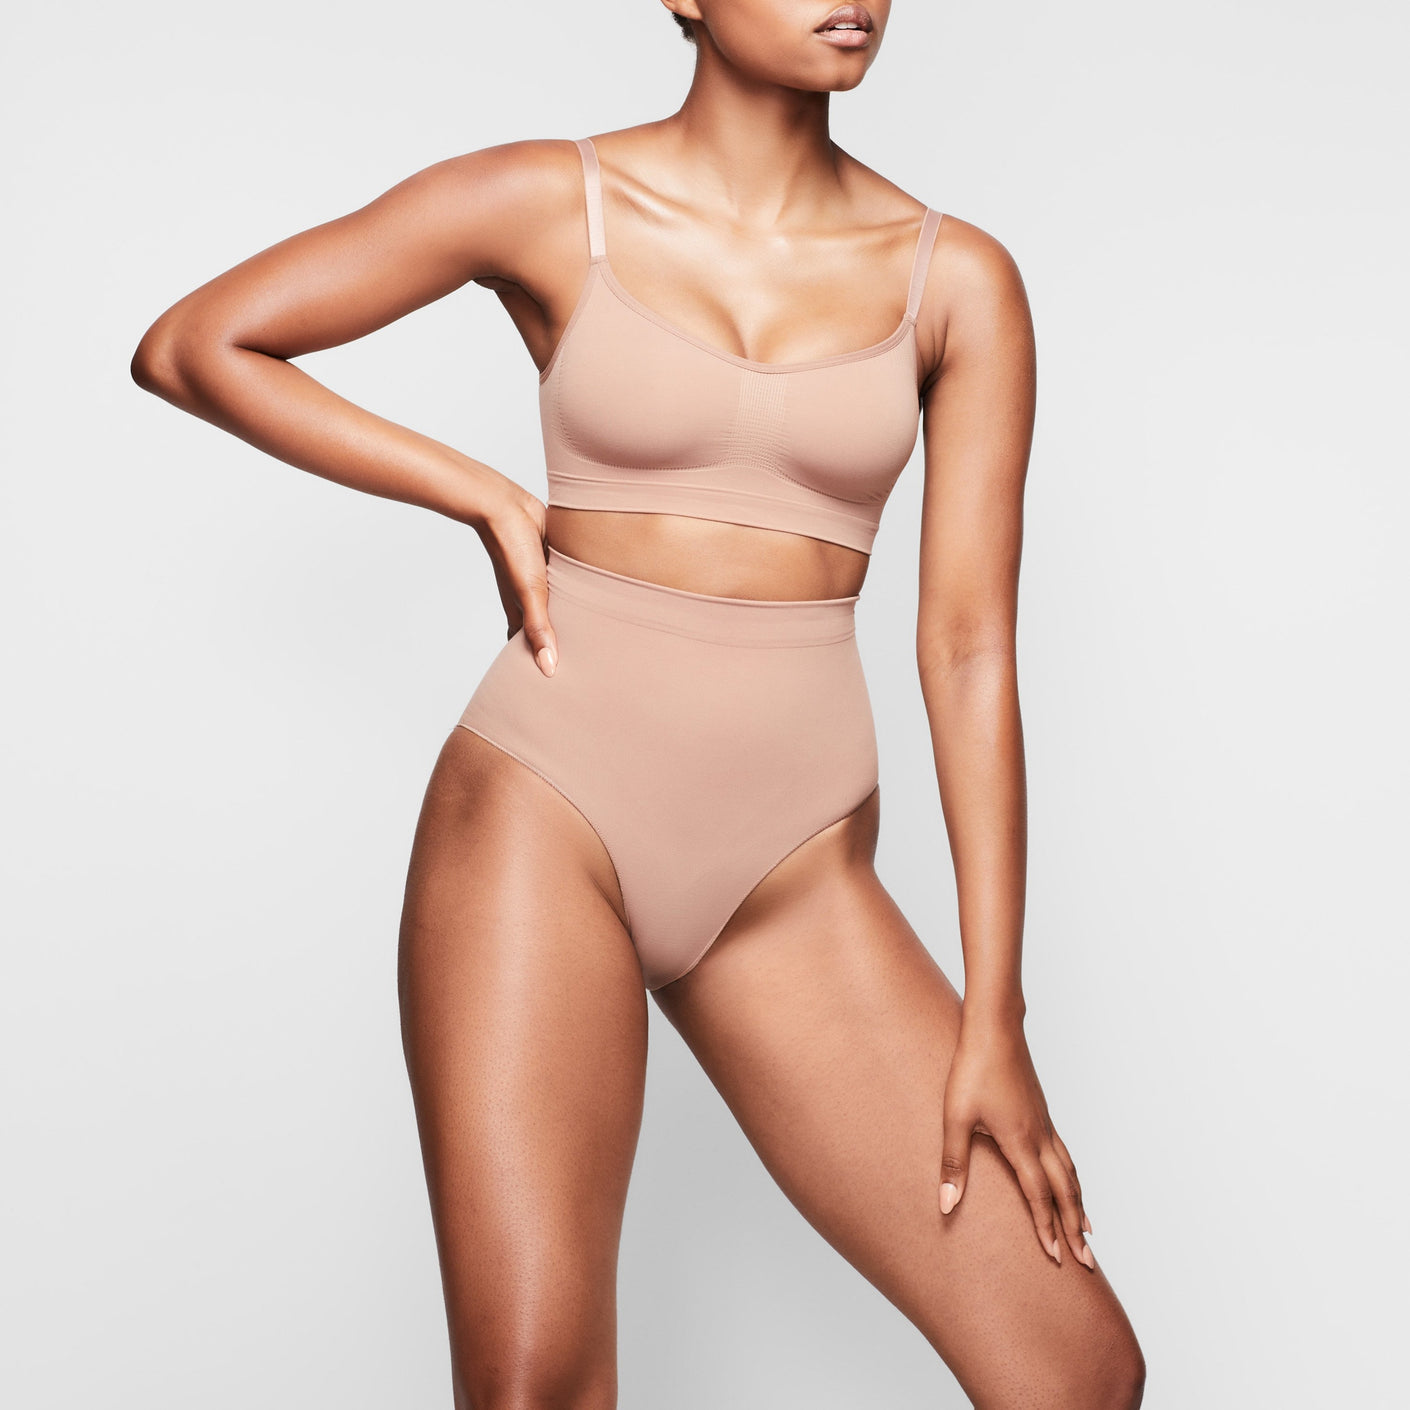 BNWT Skims Sculpting Short Mid Thigh with Open Gusset in Cocoa, Umber,  Sienna, and Clay, size S/M [AVAILABLE, ON HAND], Women's Fashion,  Undergarments & Loungewear on Carousell